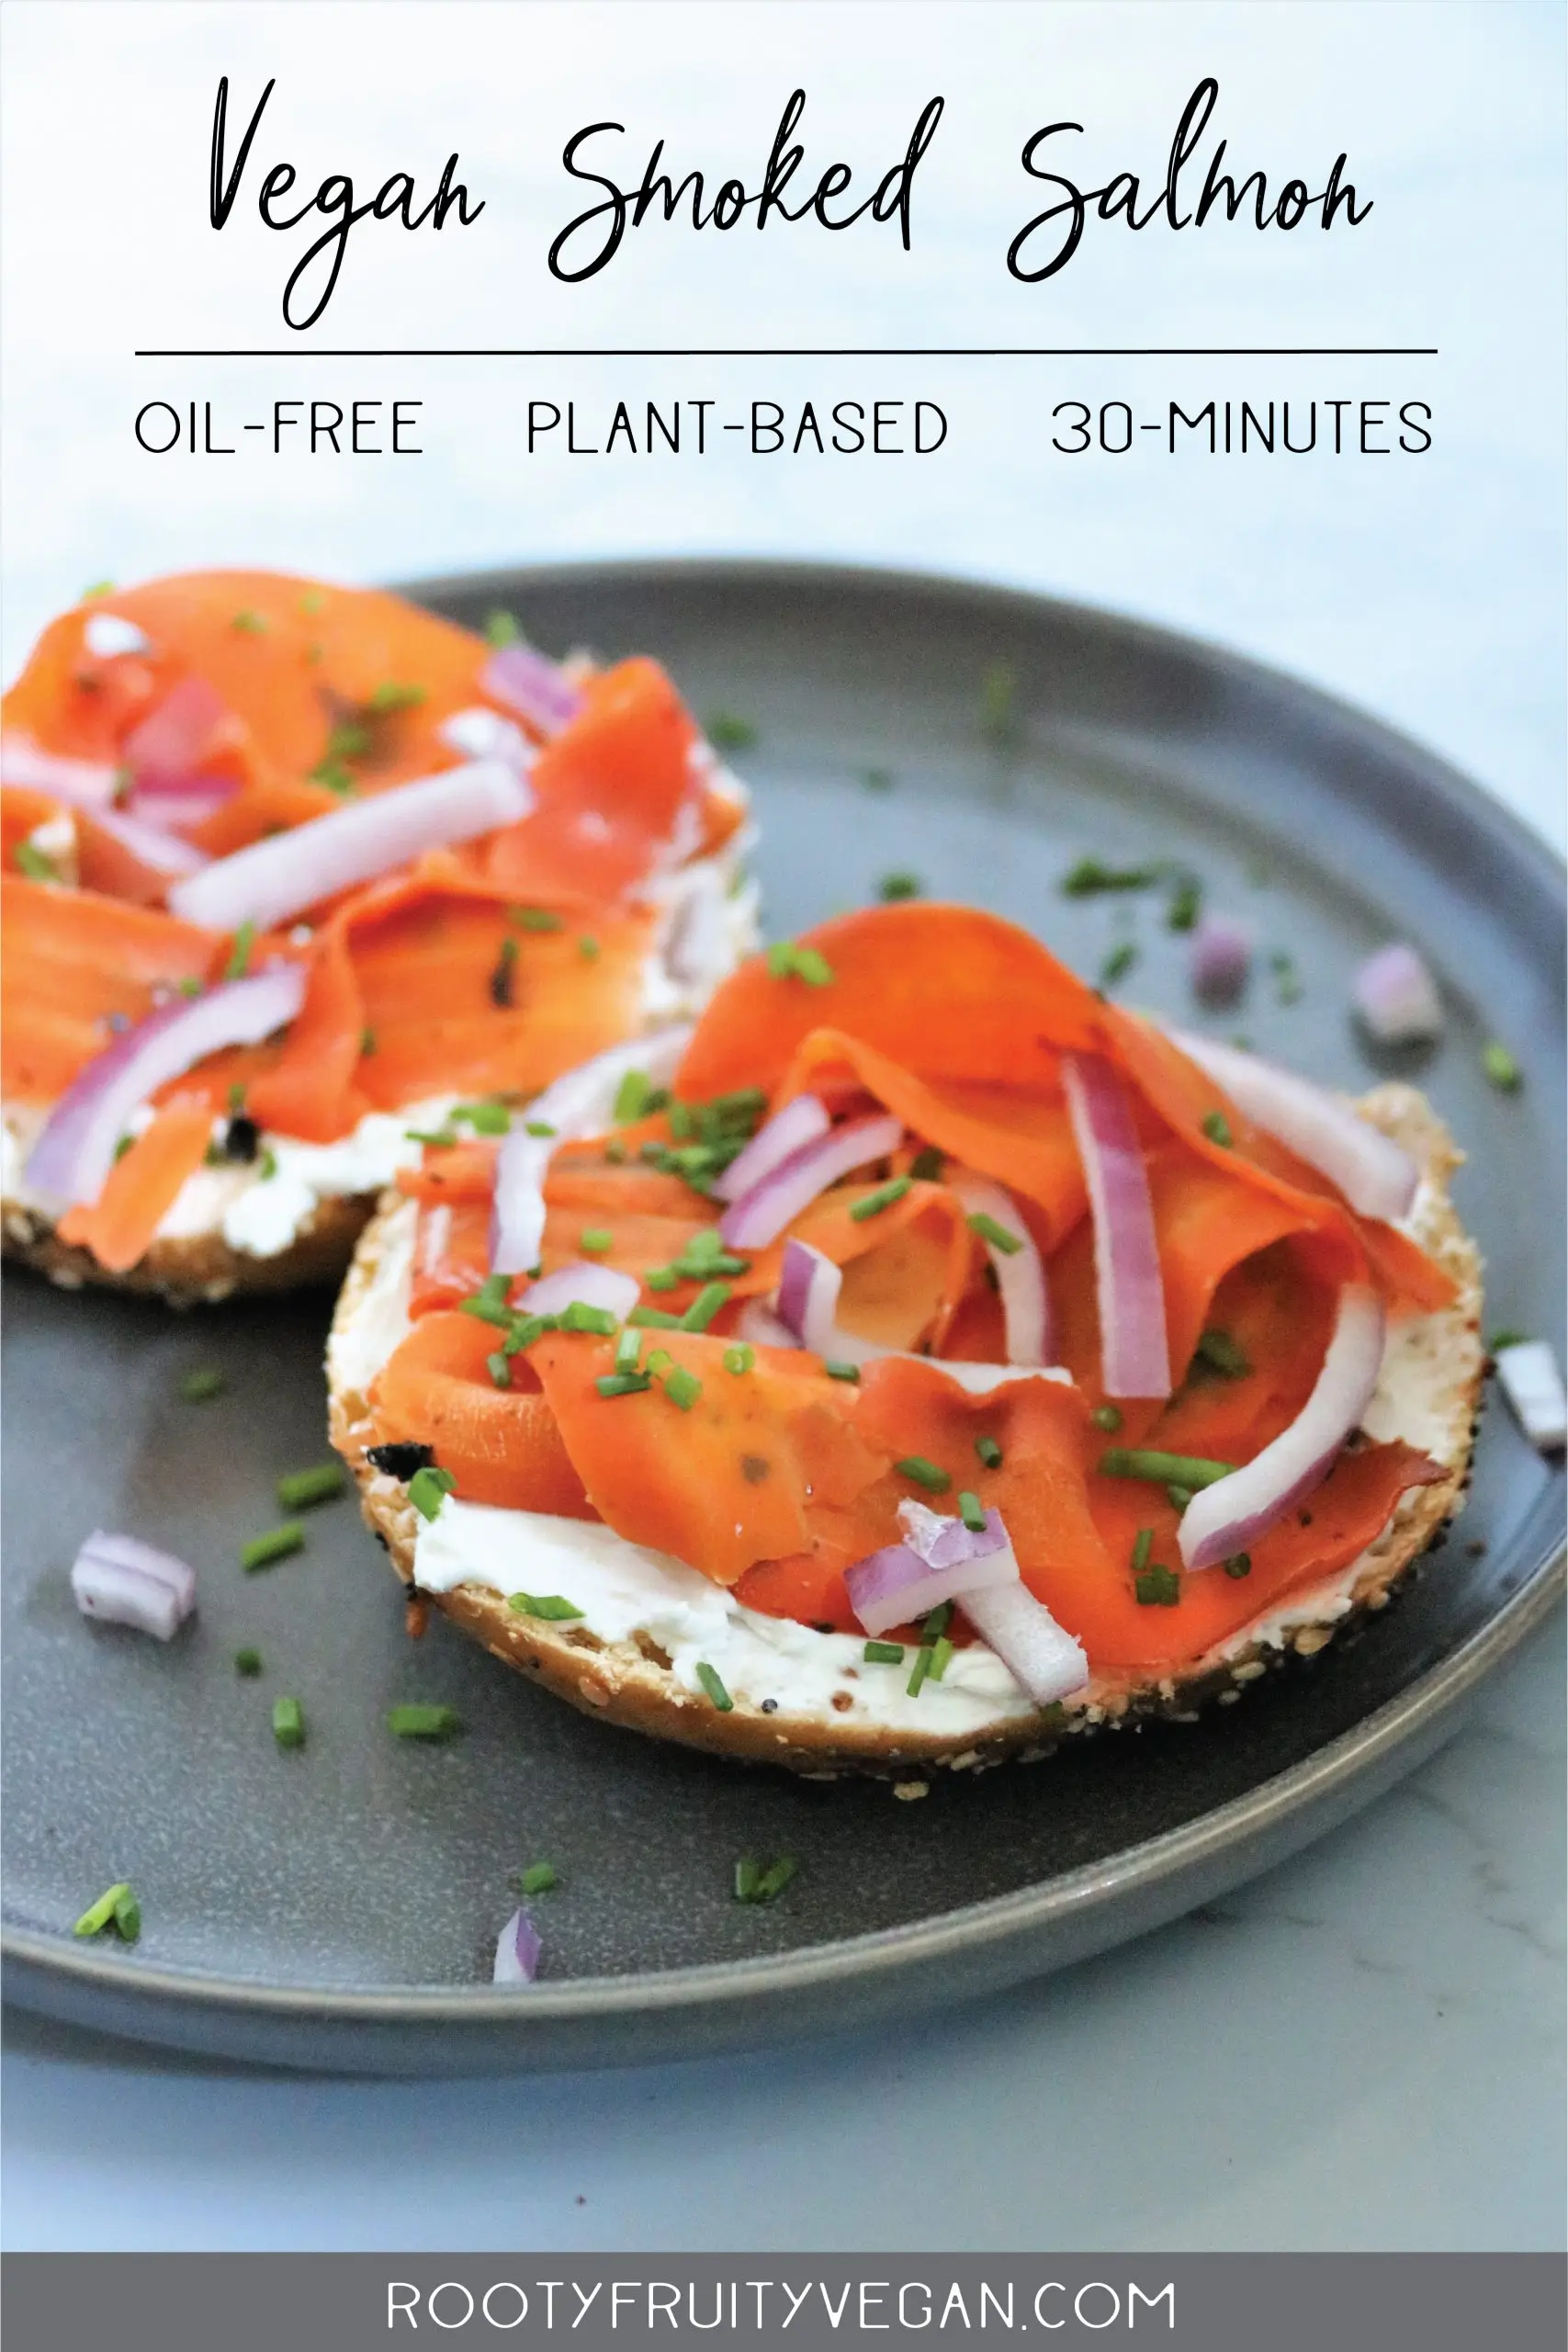 meat free smoked salmon - What is a good meat alternative to salmon